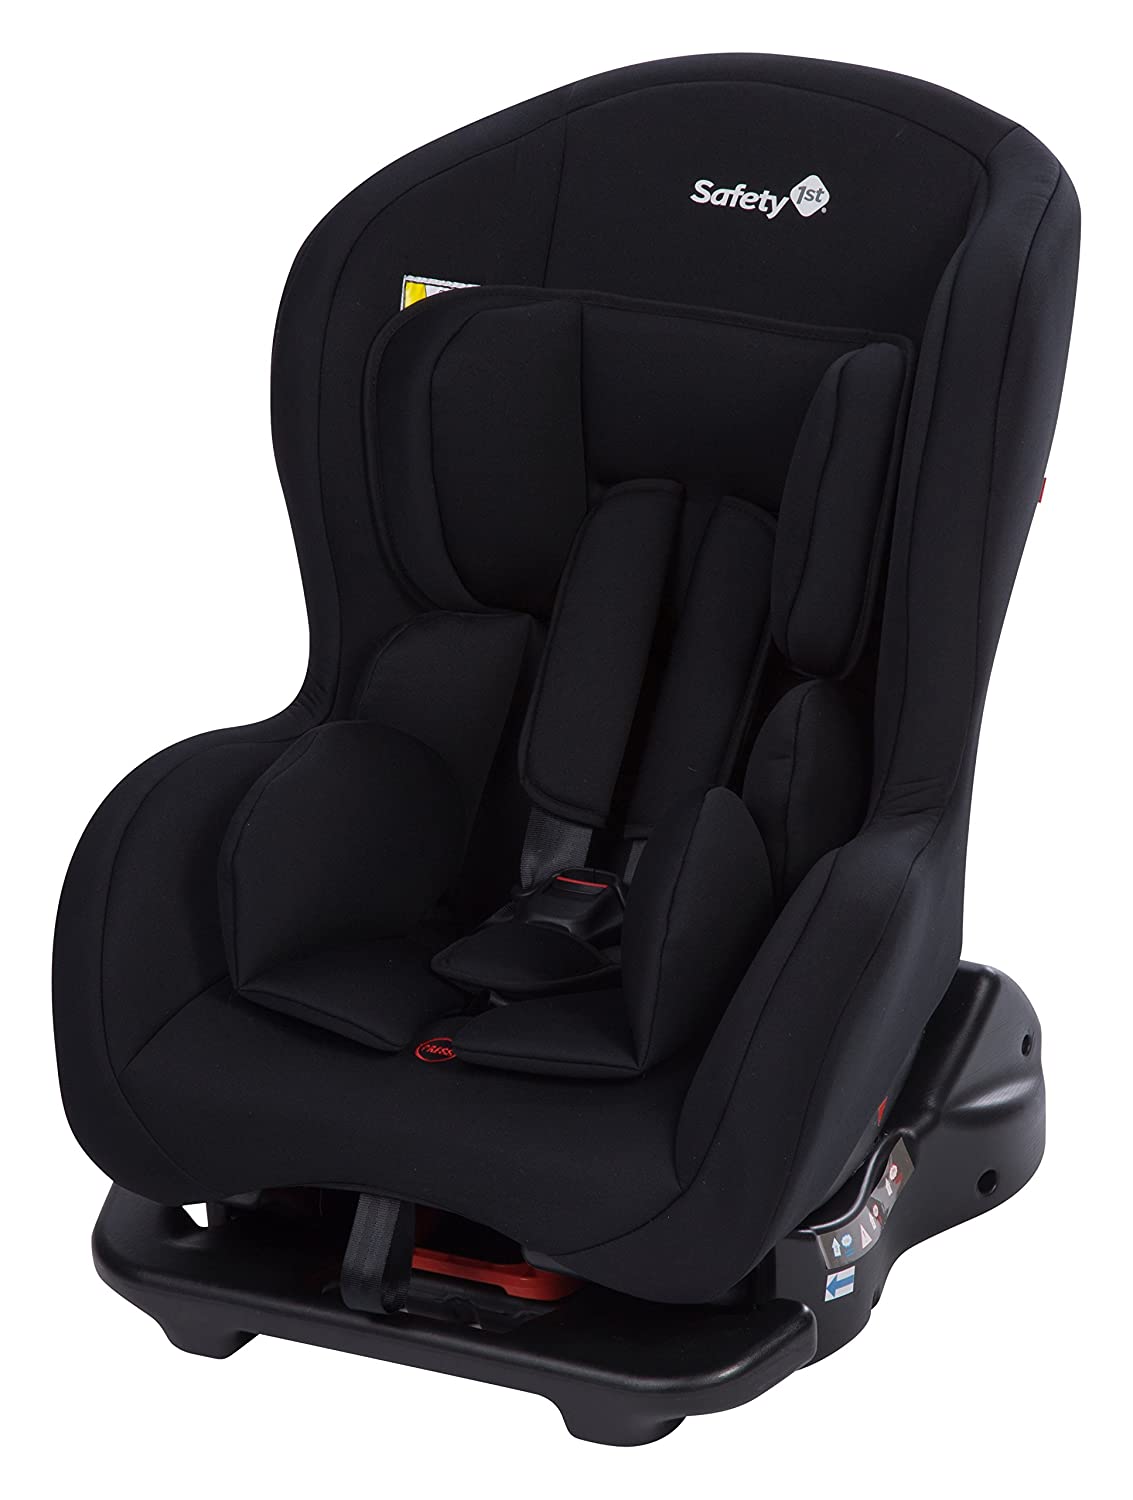 Safety 1st Sweet Safe Child Seat Group 0/1 (0 - 18 kg) Soft Padded and Includes 5-Point Harness Can be Used from Birth to Approx. 4 Years Full Black